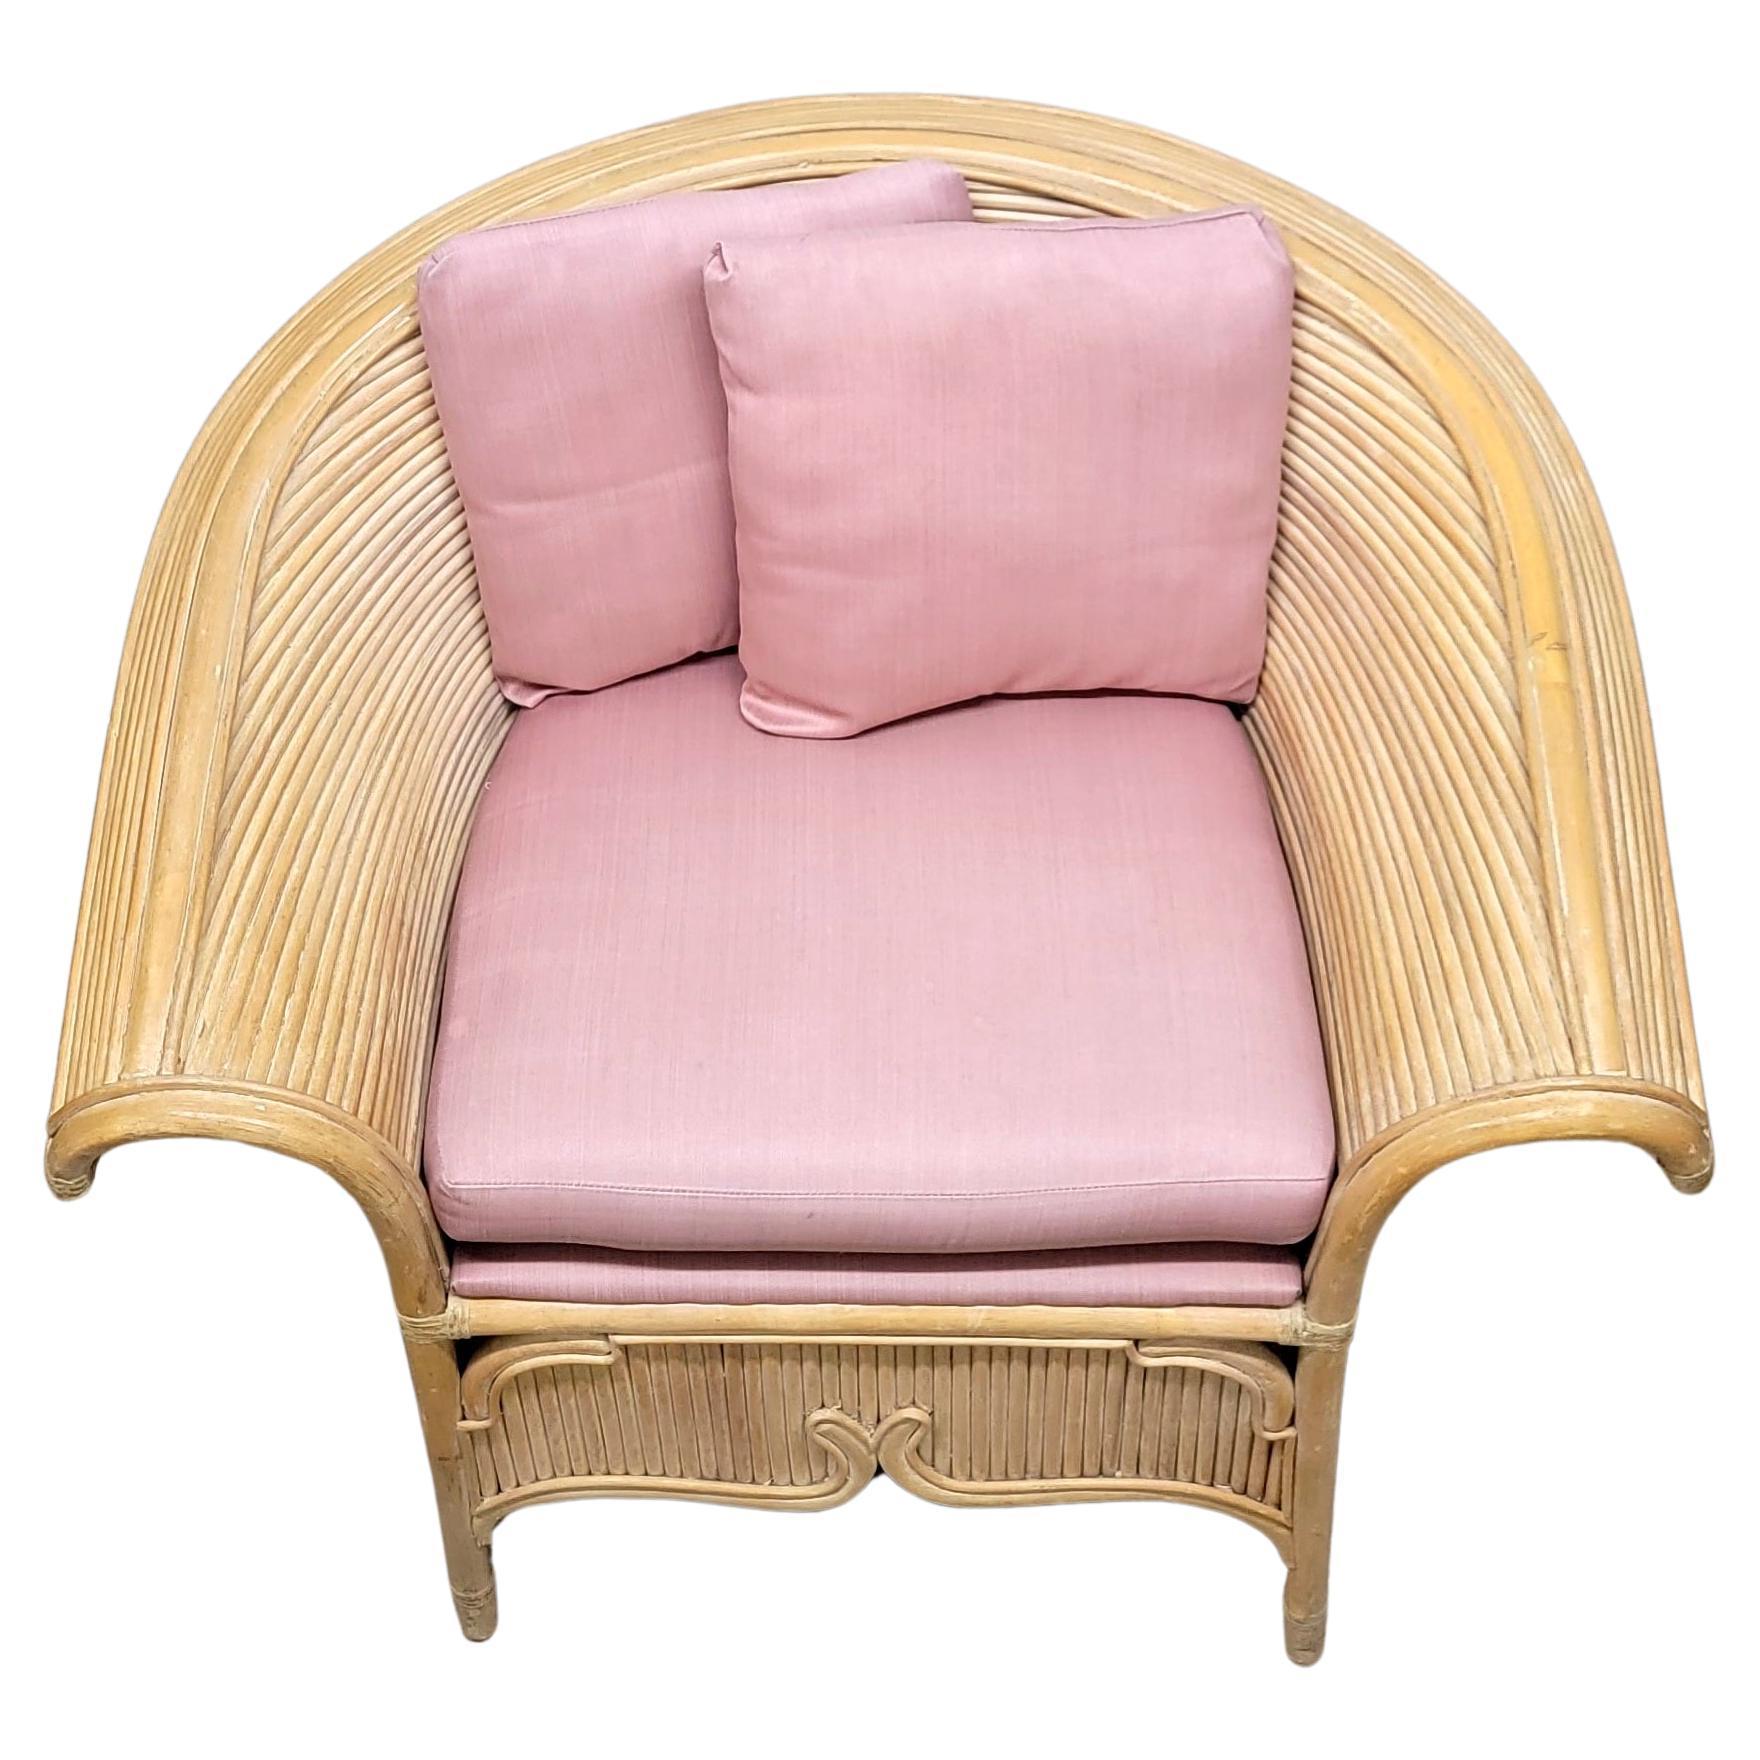 A gorgeous vintage fan back pencil-reed split bamboo armchair dating from the 1970s. The hand-crafted barrel shaped back imparts a superior level of comfort all while adding a Chinoiserie inspired wow factor to your Palm Beach, coastal or boho chic